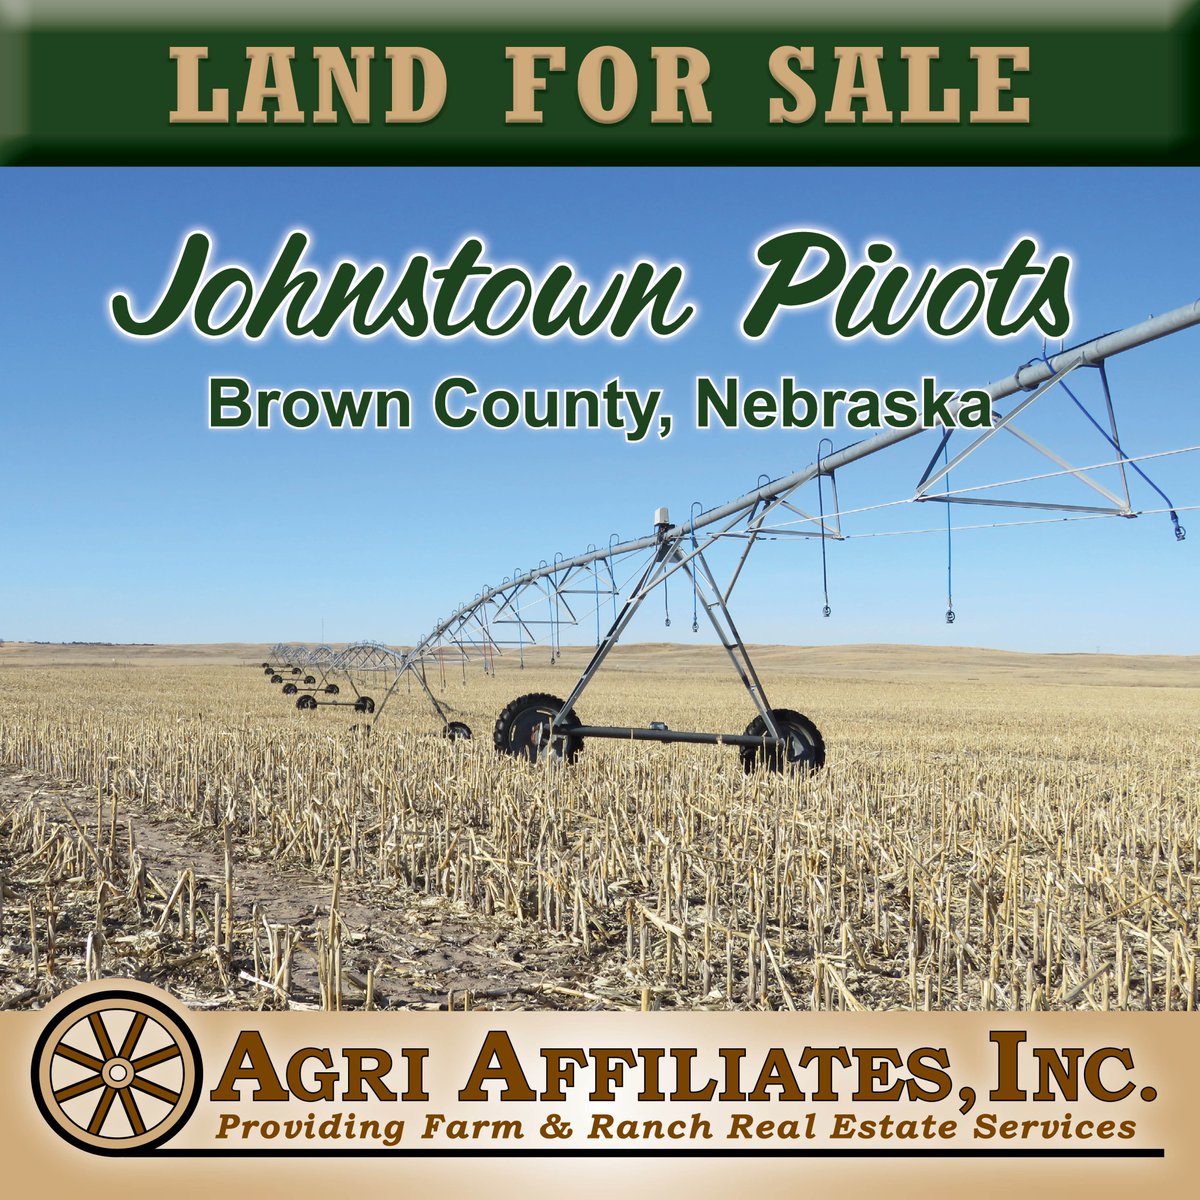 New #Land #ForSale
Unlock the potential of Johnstown Pivots. 3,042 ± #acres w/ 14 center #pivots, abundant ground water reserves, & fenced/watered #rangeland.
Located off major Highway 20, in #BrownCounty, #Nebraska. 

Take a look to learn more 👉 bit.ly/Johnstown-Pivo…